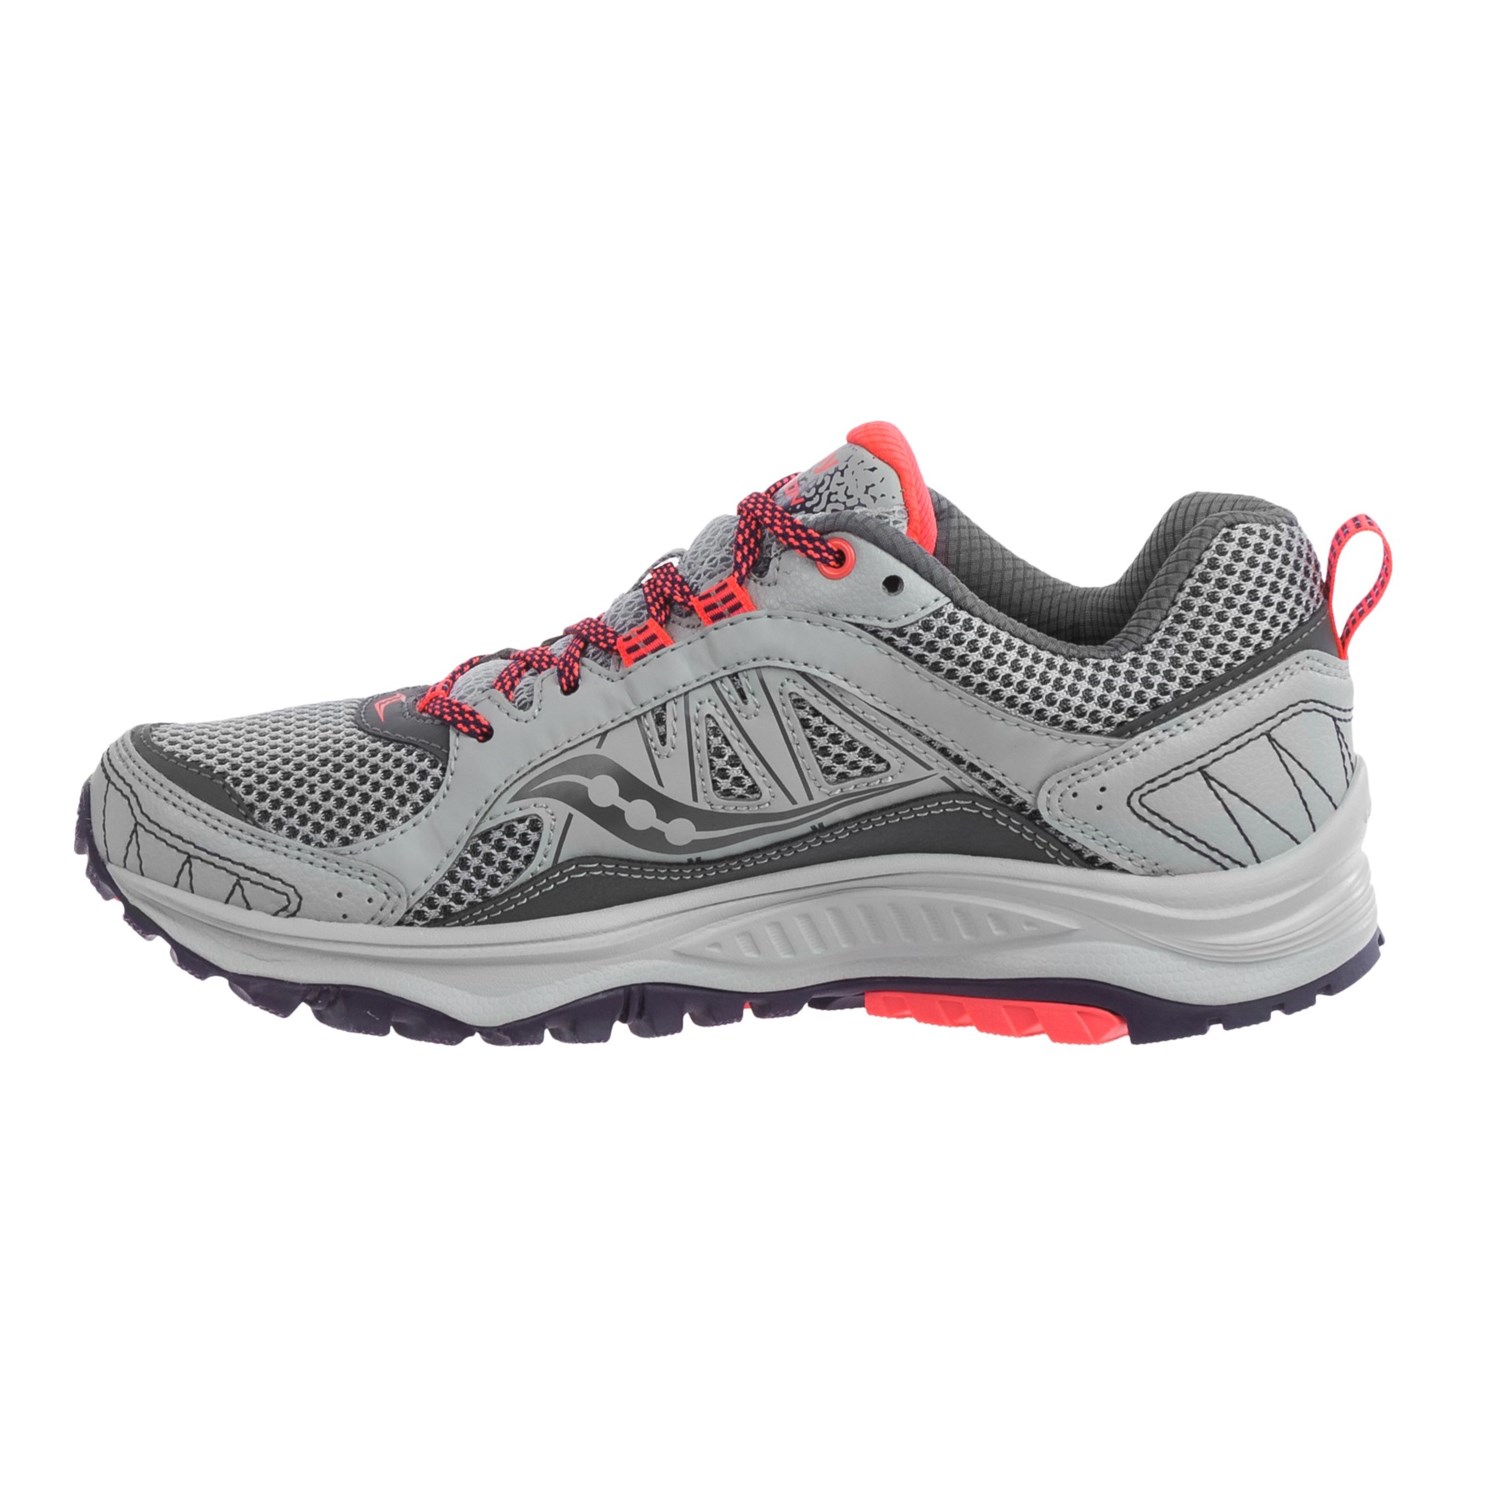 saucony women's grid excursion tr9 trail running shoe